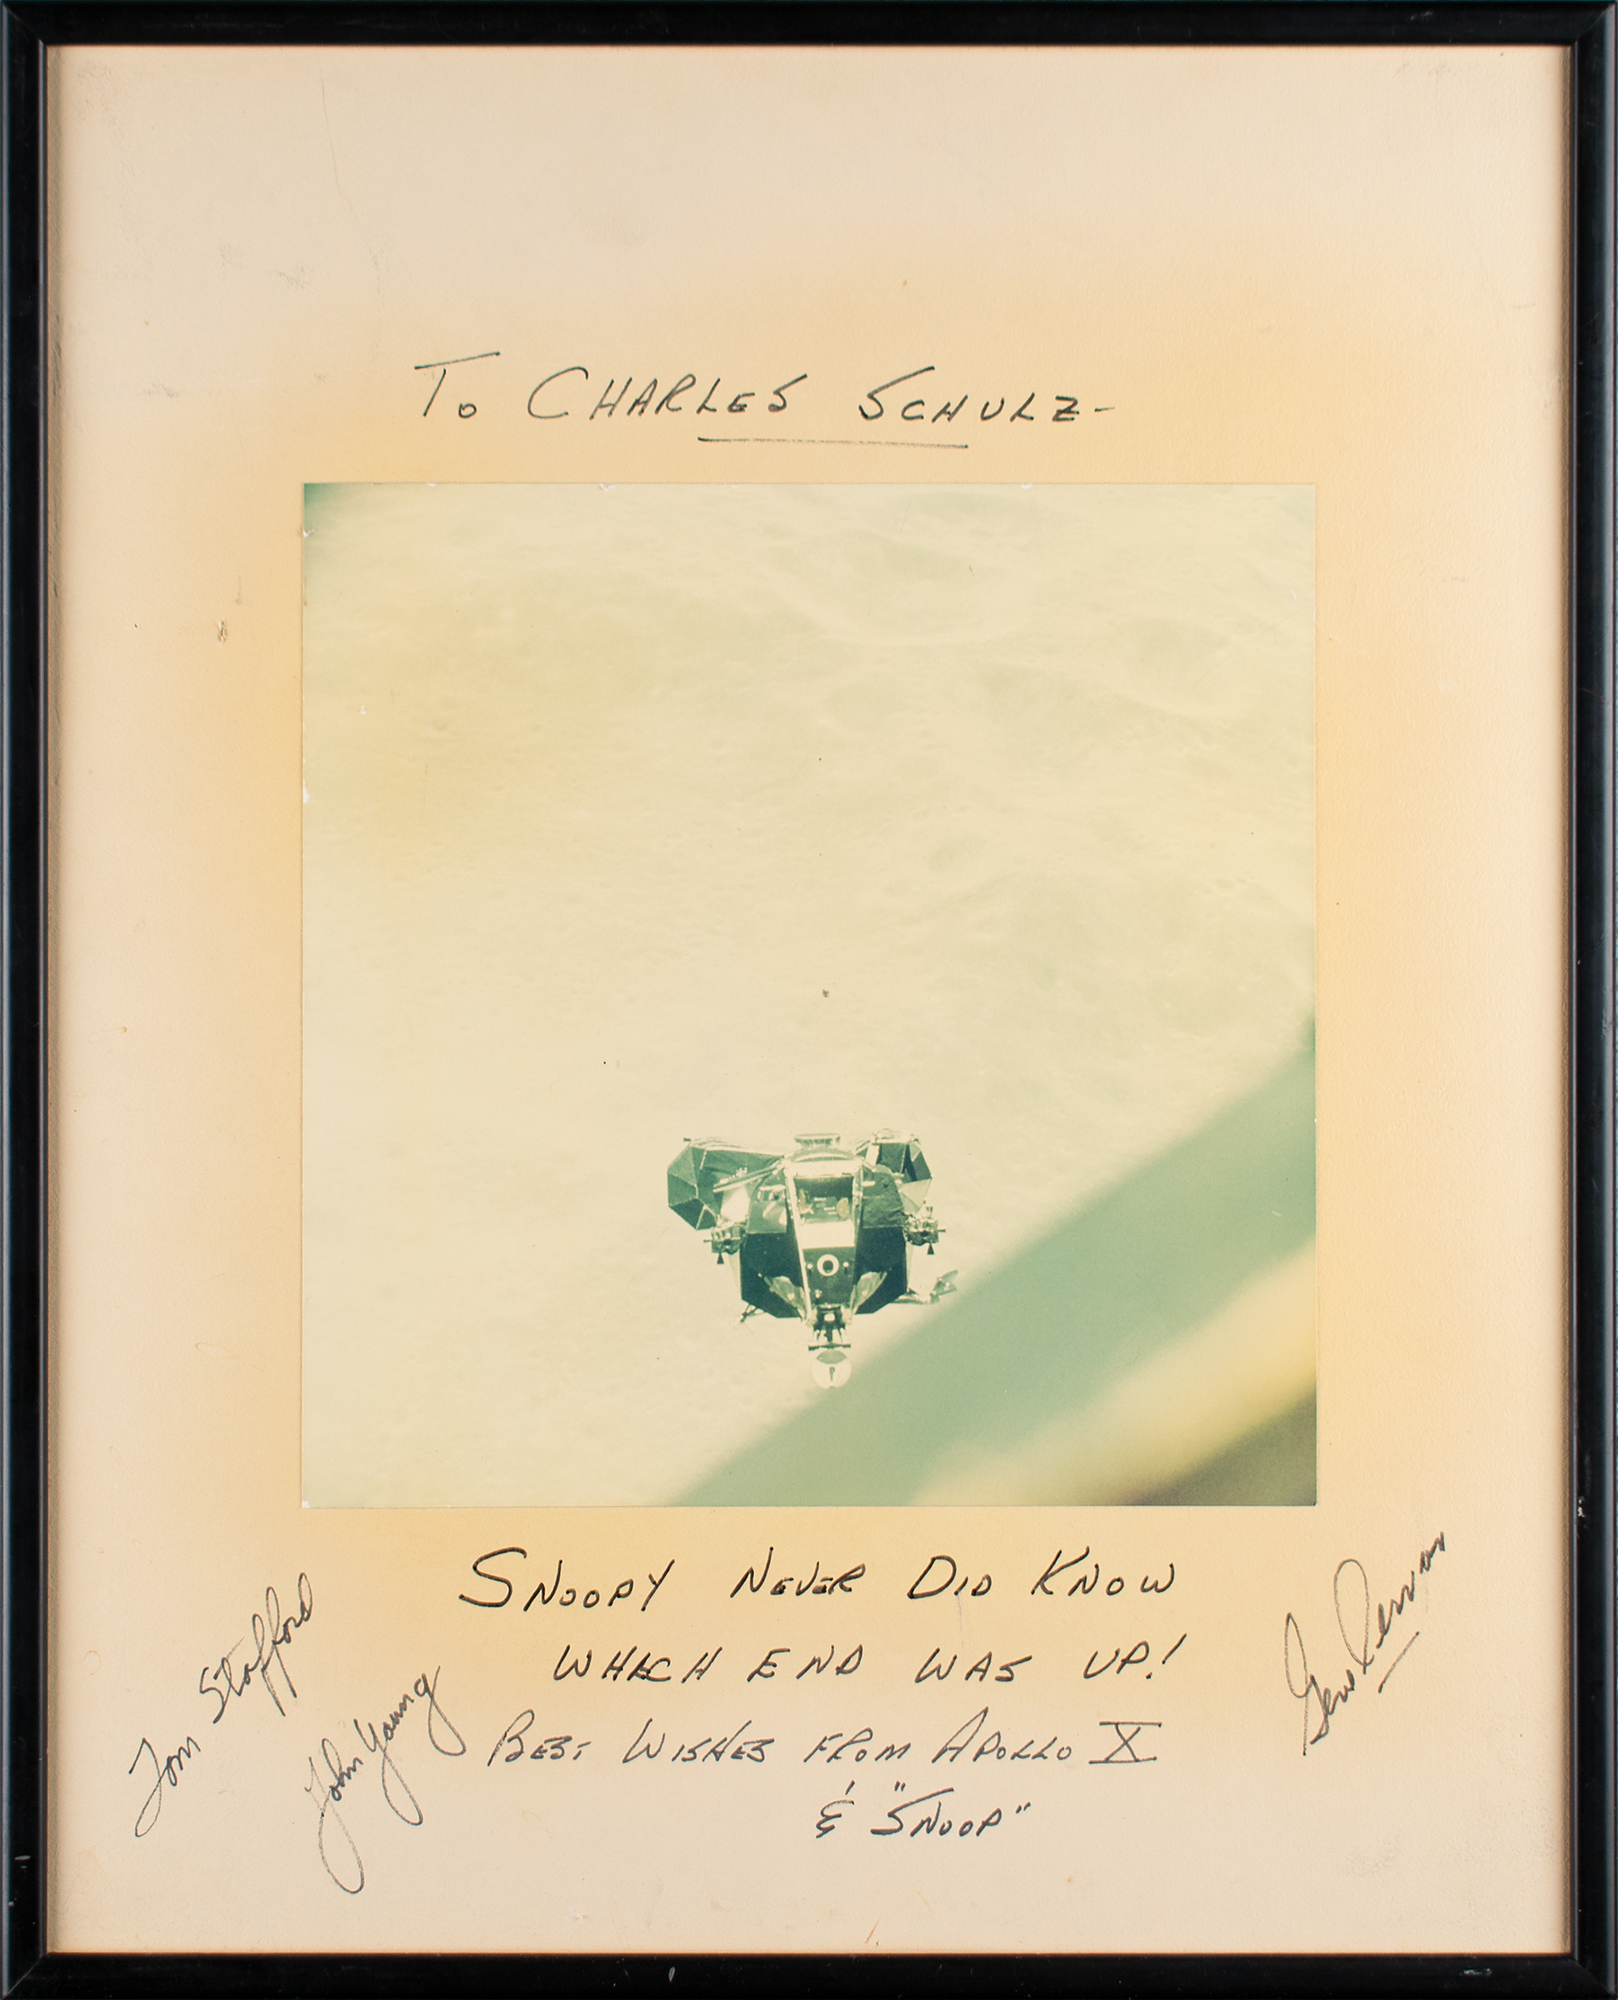 Lot #3172 Apollo 10 Signed Photograph Presented to Charles Schulz